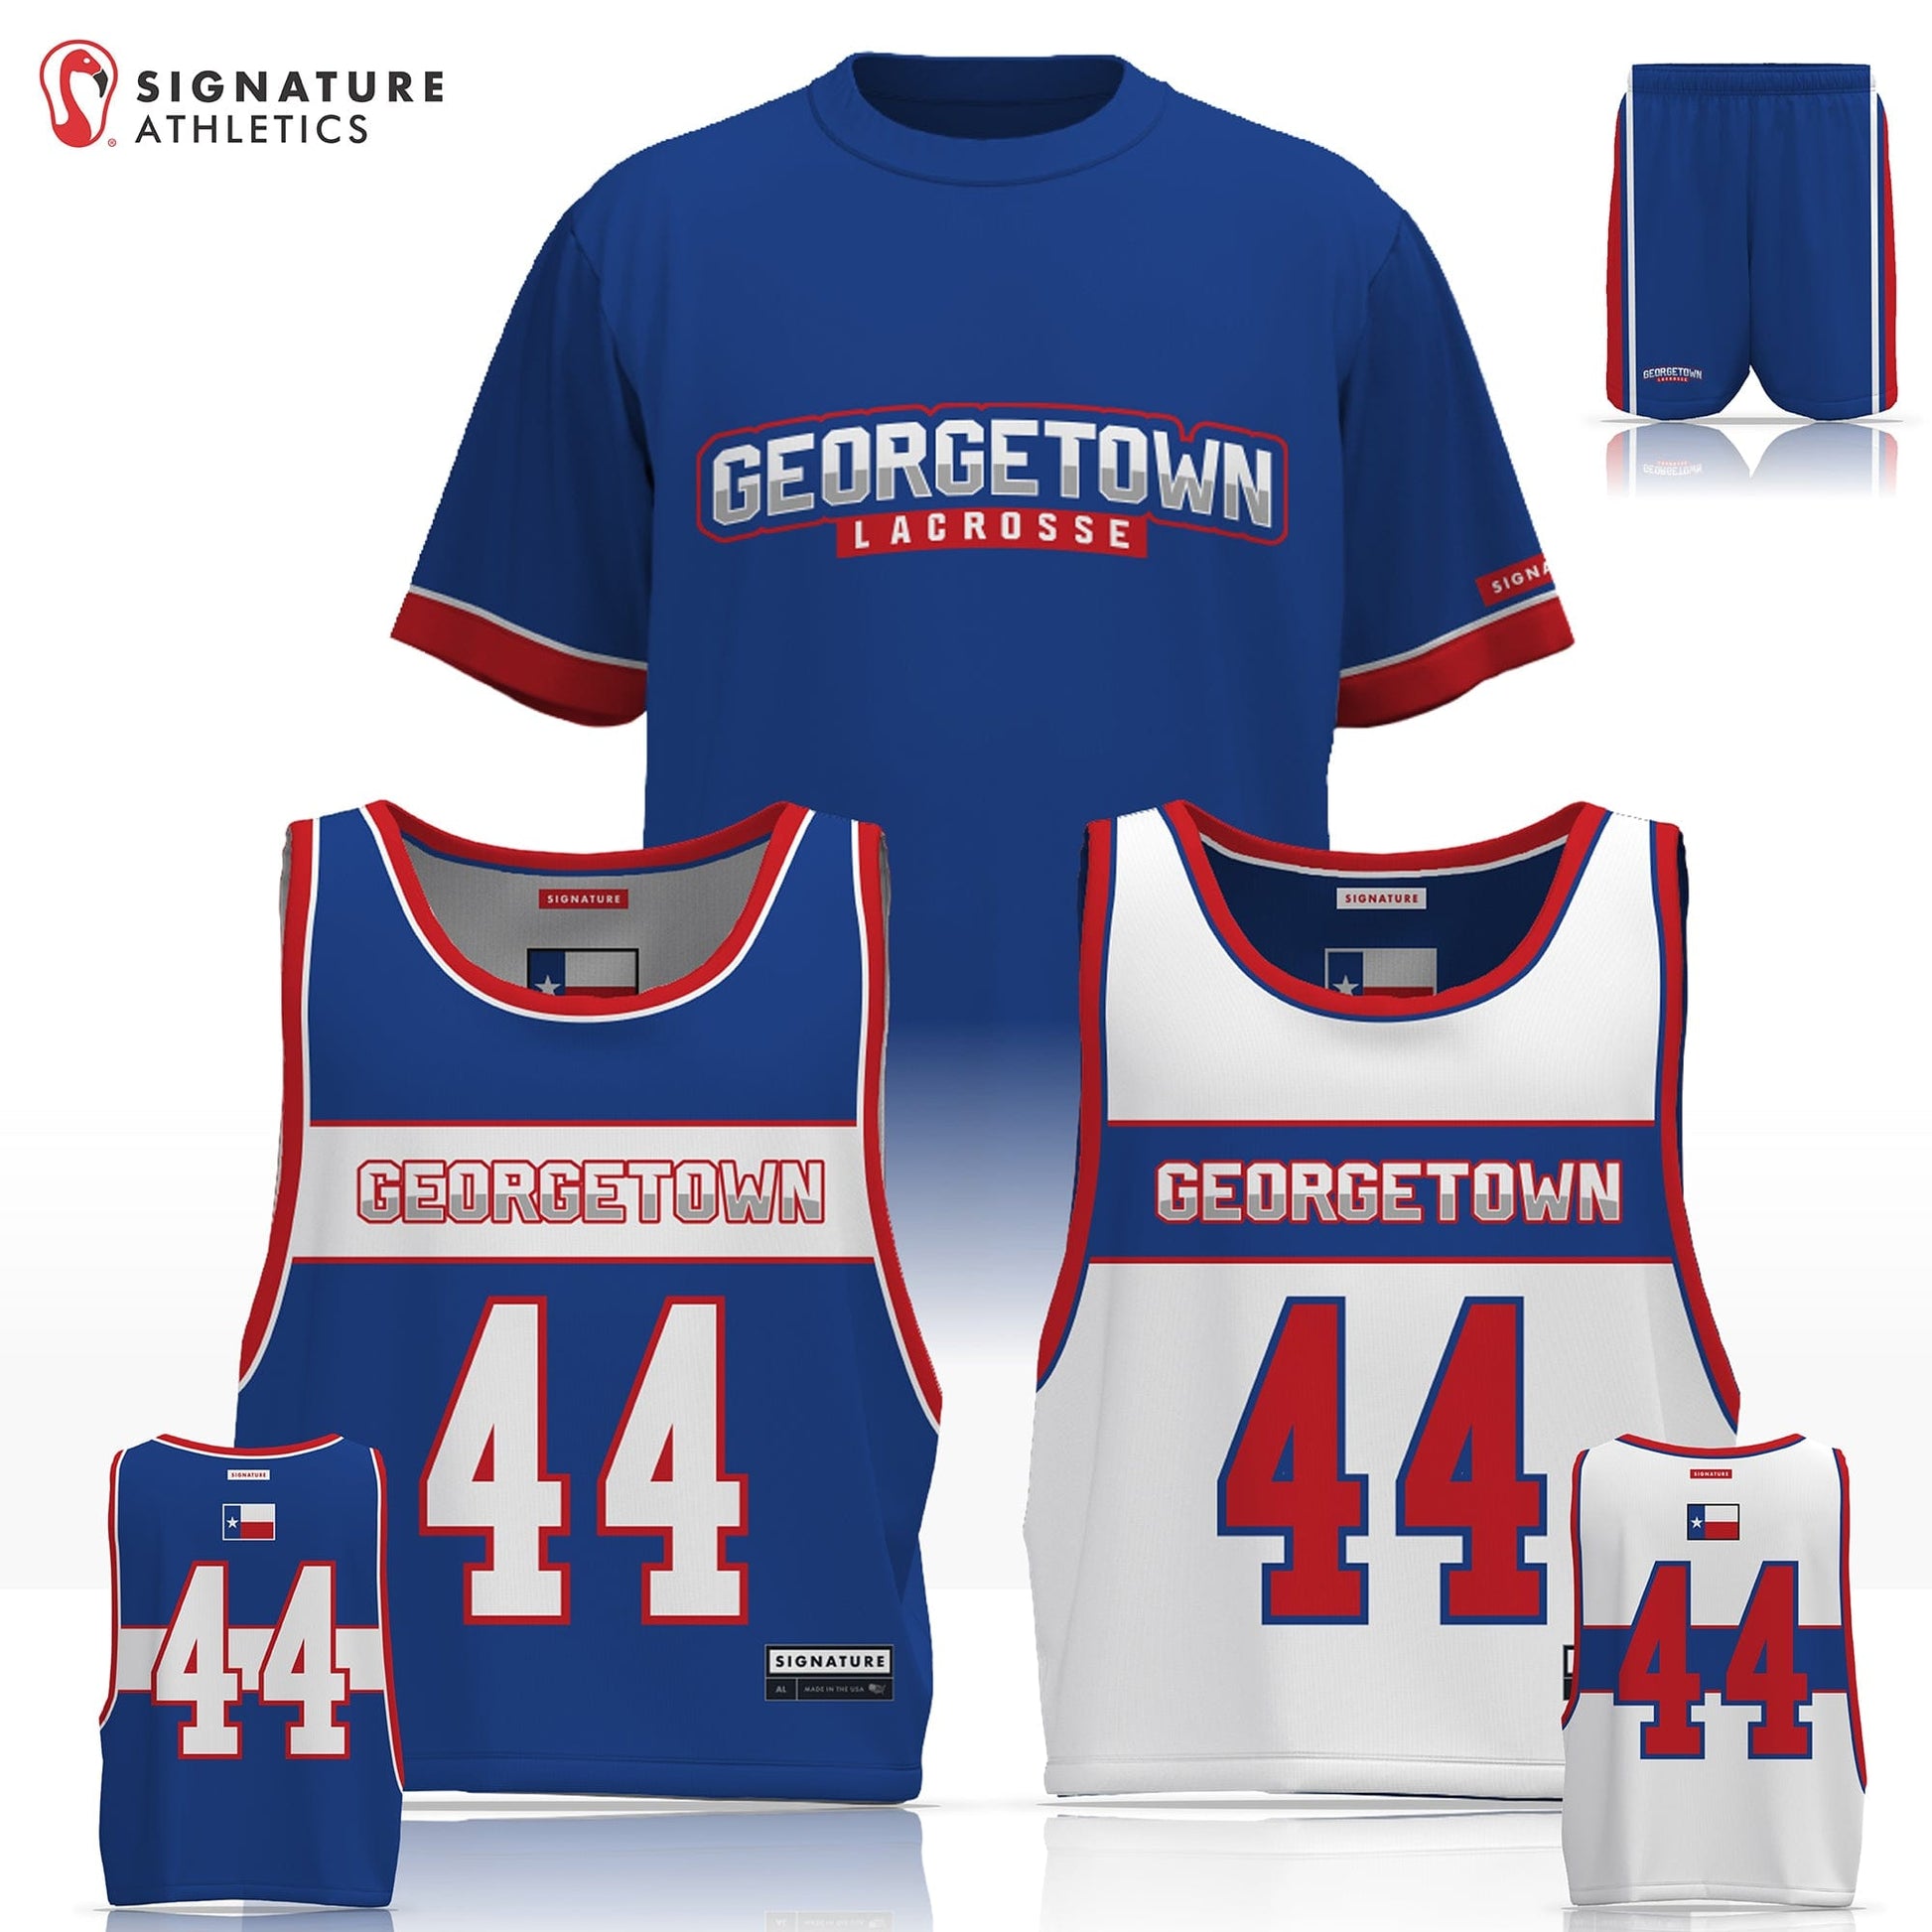 Georgetown Youth Lacrosse Men's 3 Piece Player Game Package Signature Lacrosse